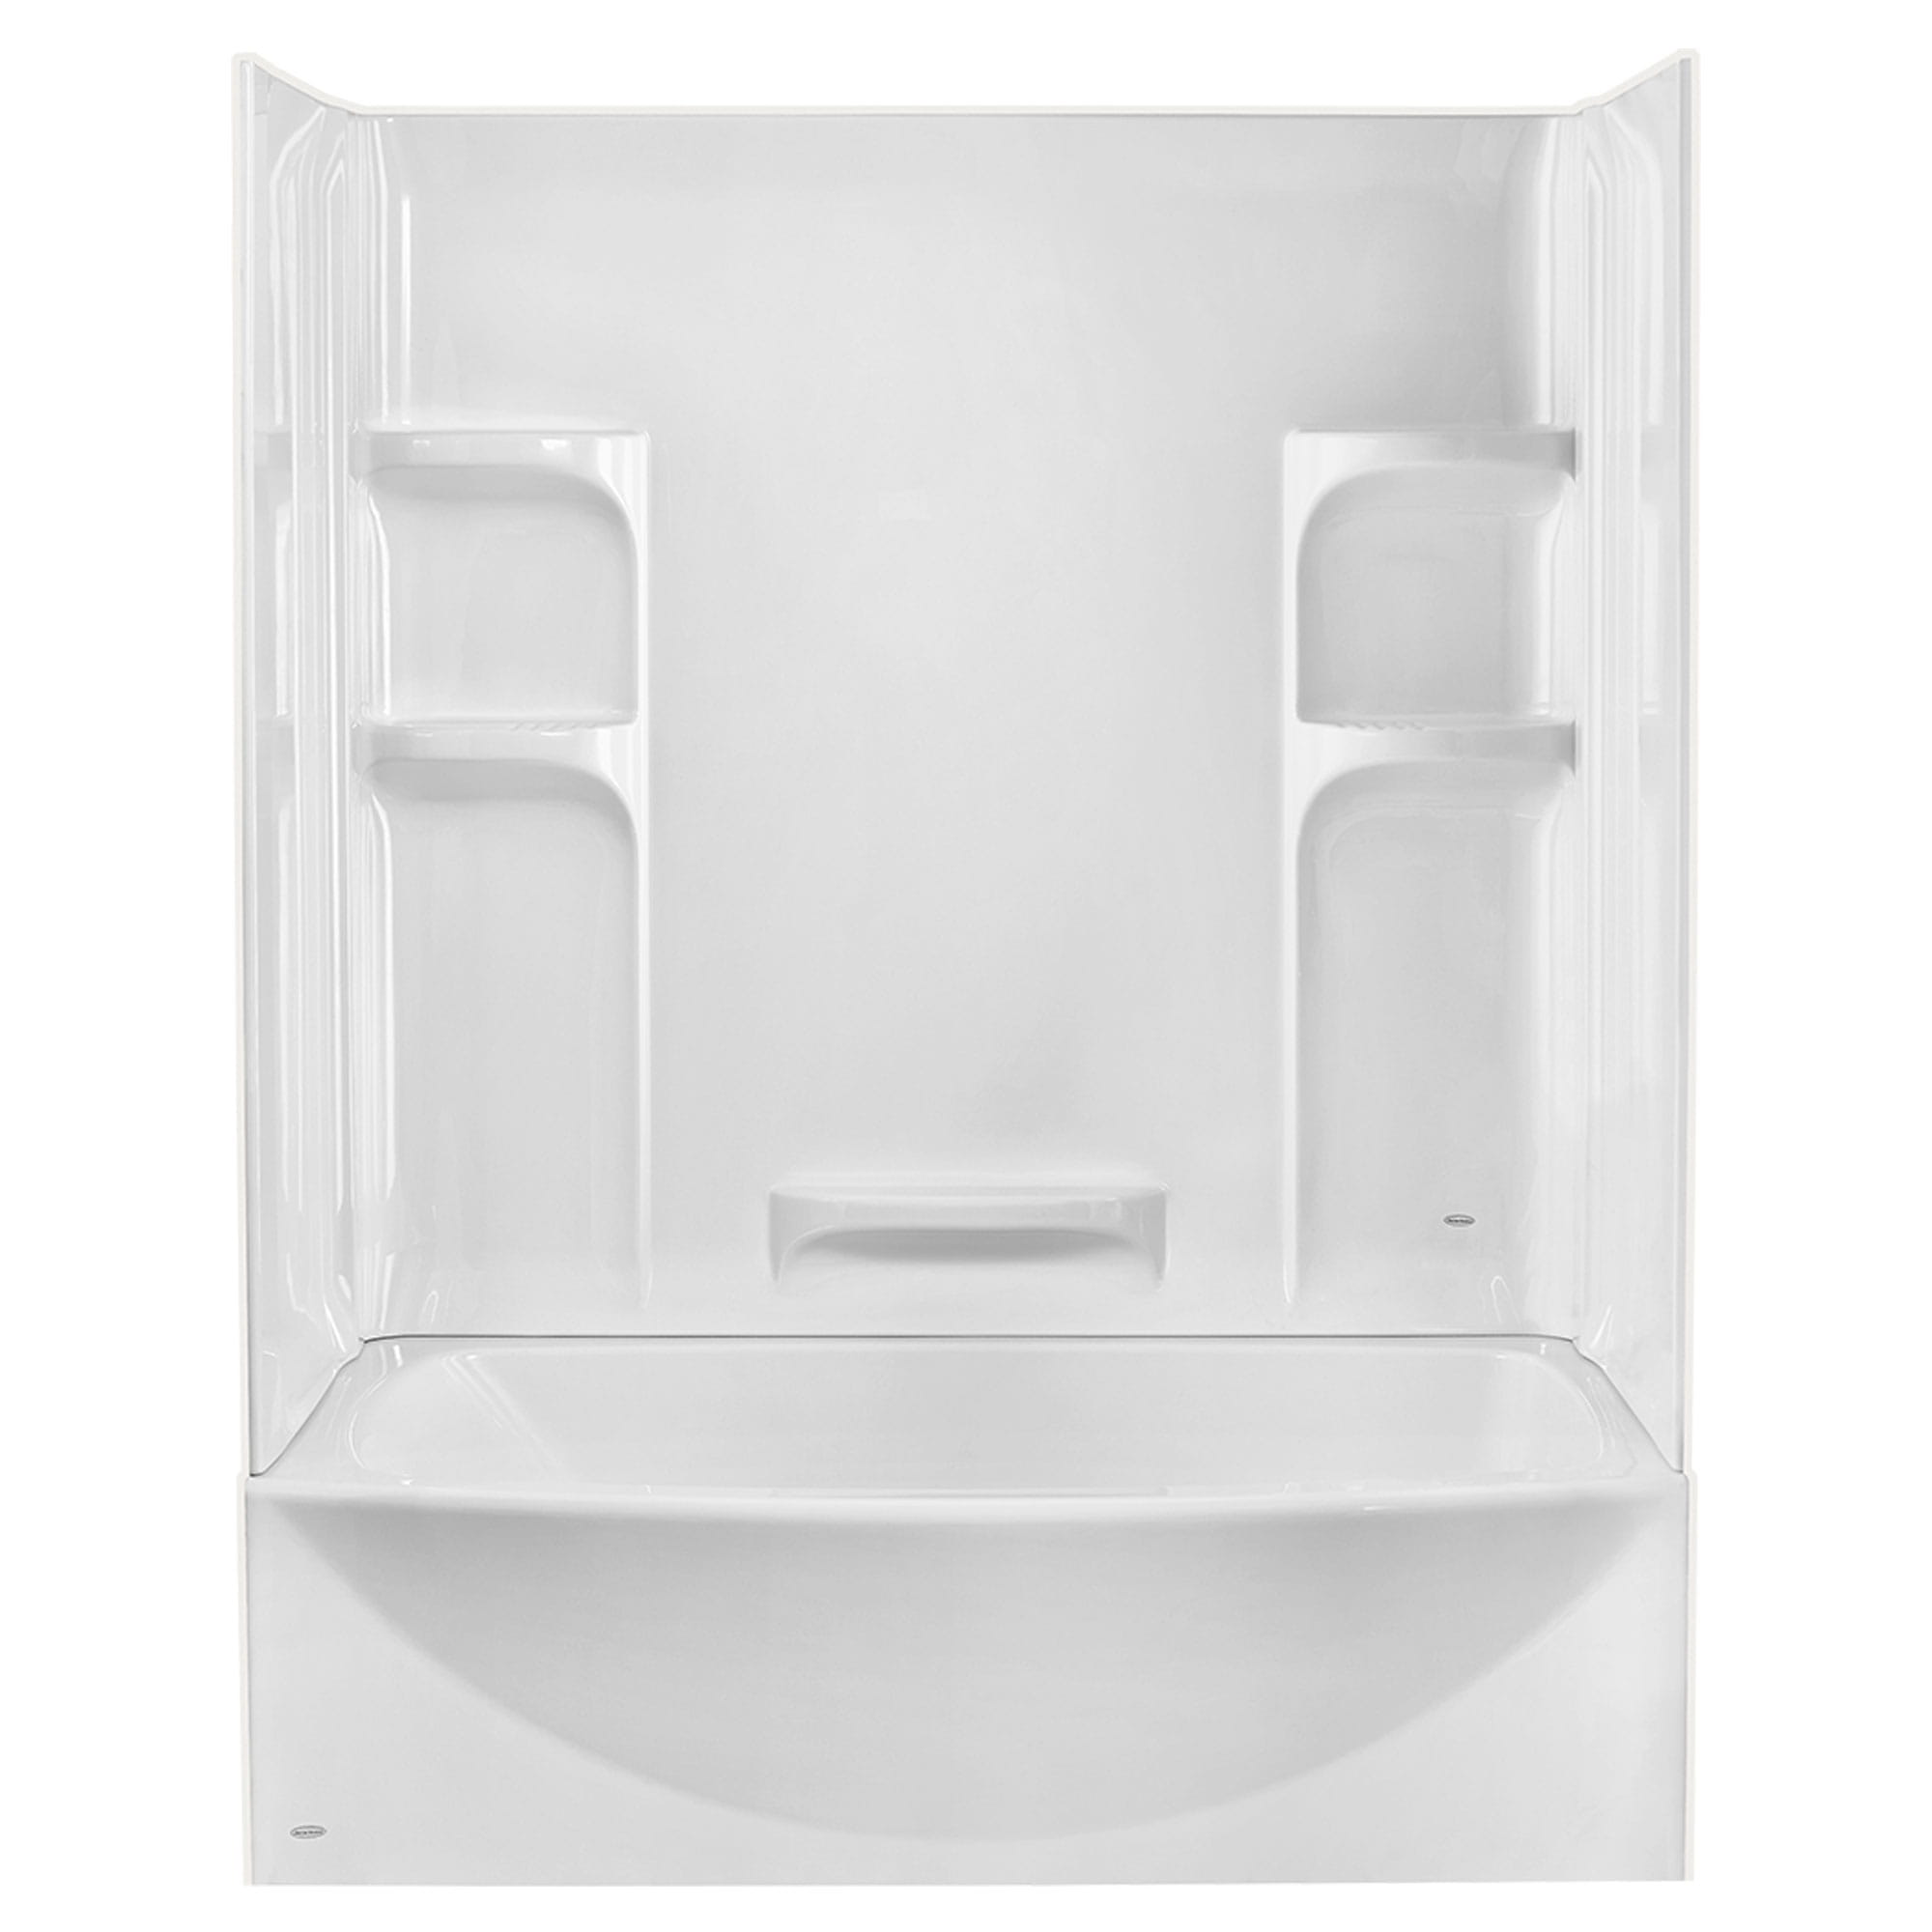 Ovation 60 x 30 Inch Integral Apron Bathtub Right Hand Outlet ARCTIC